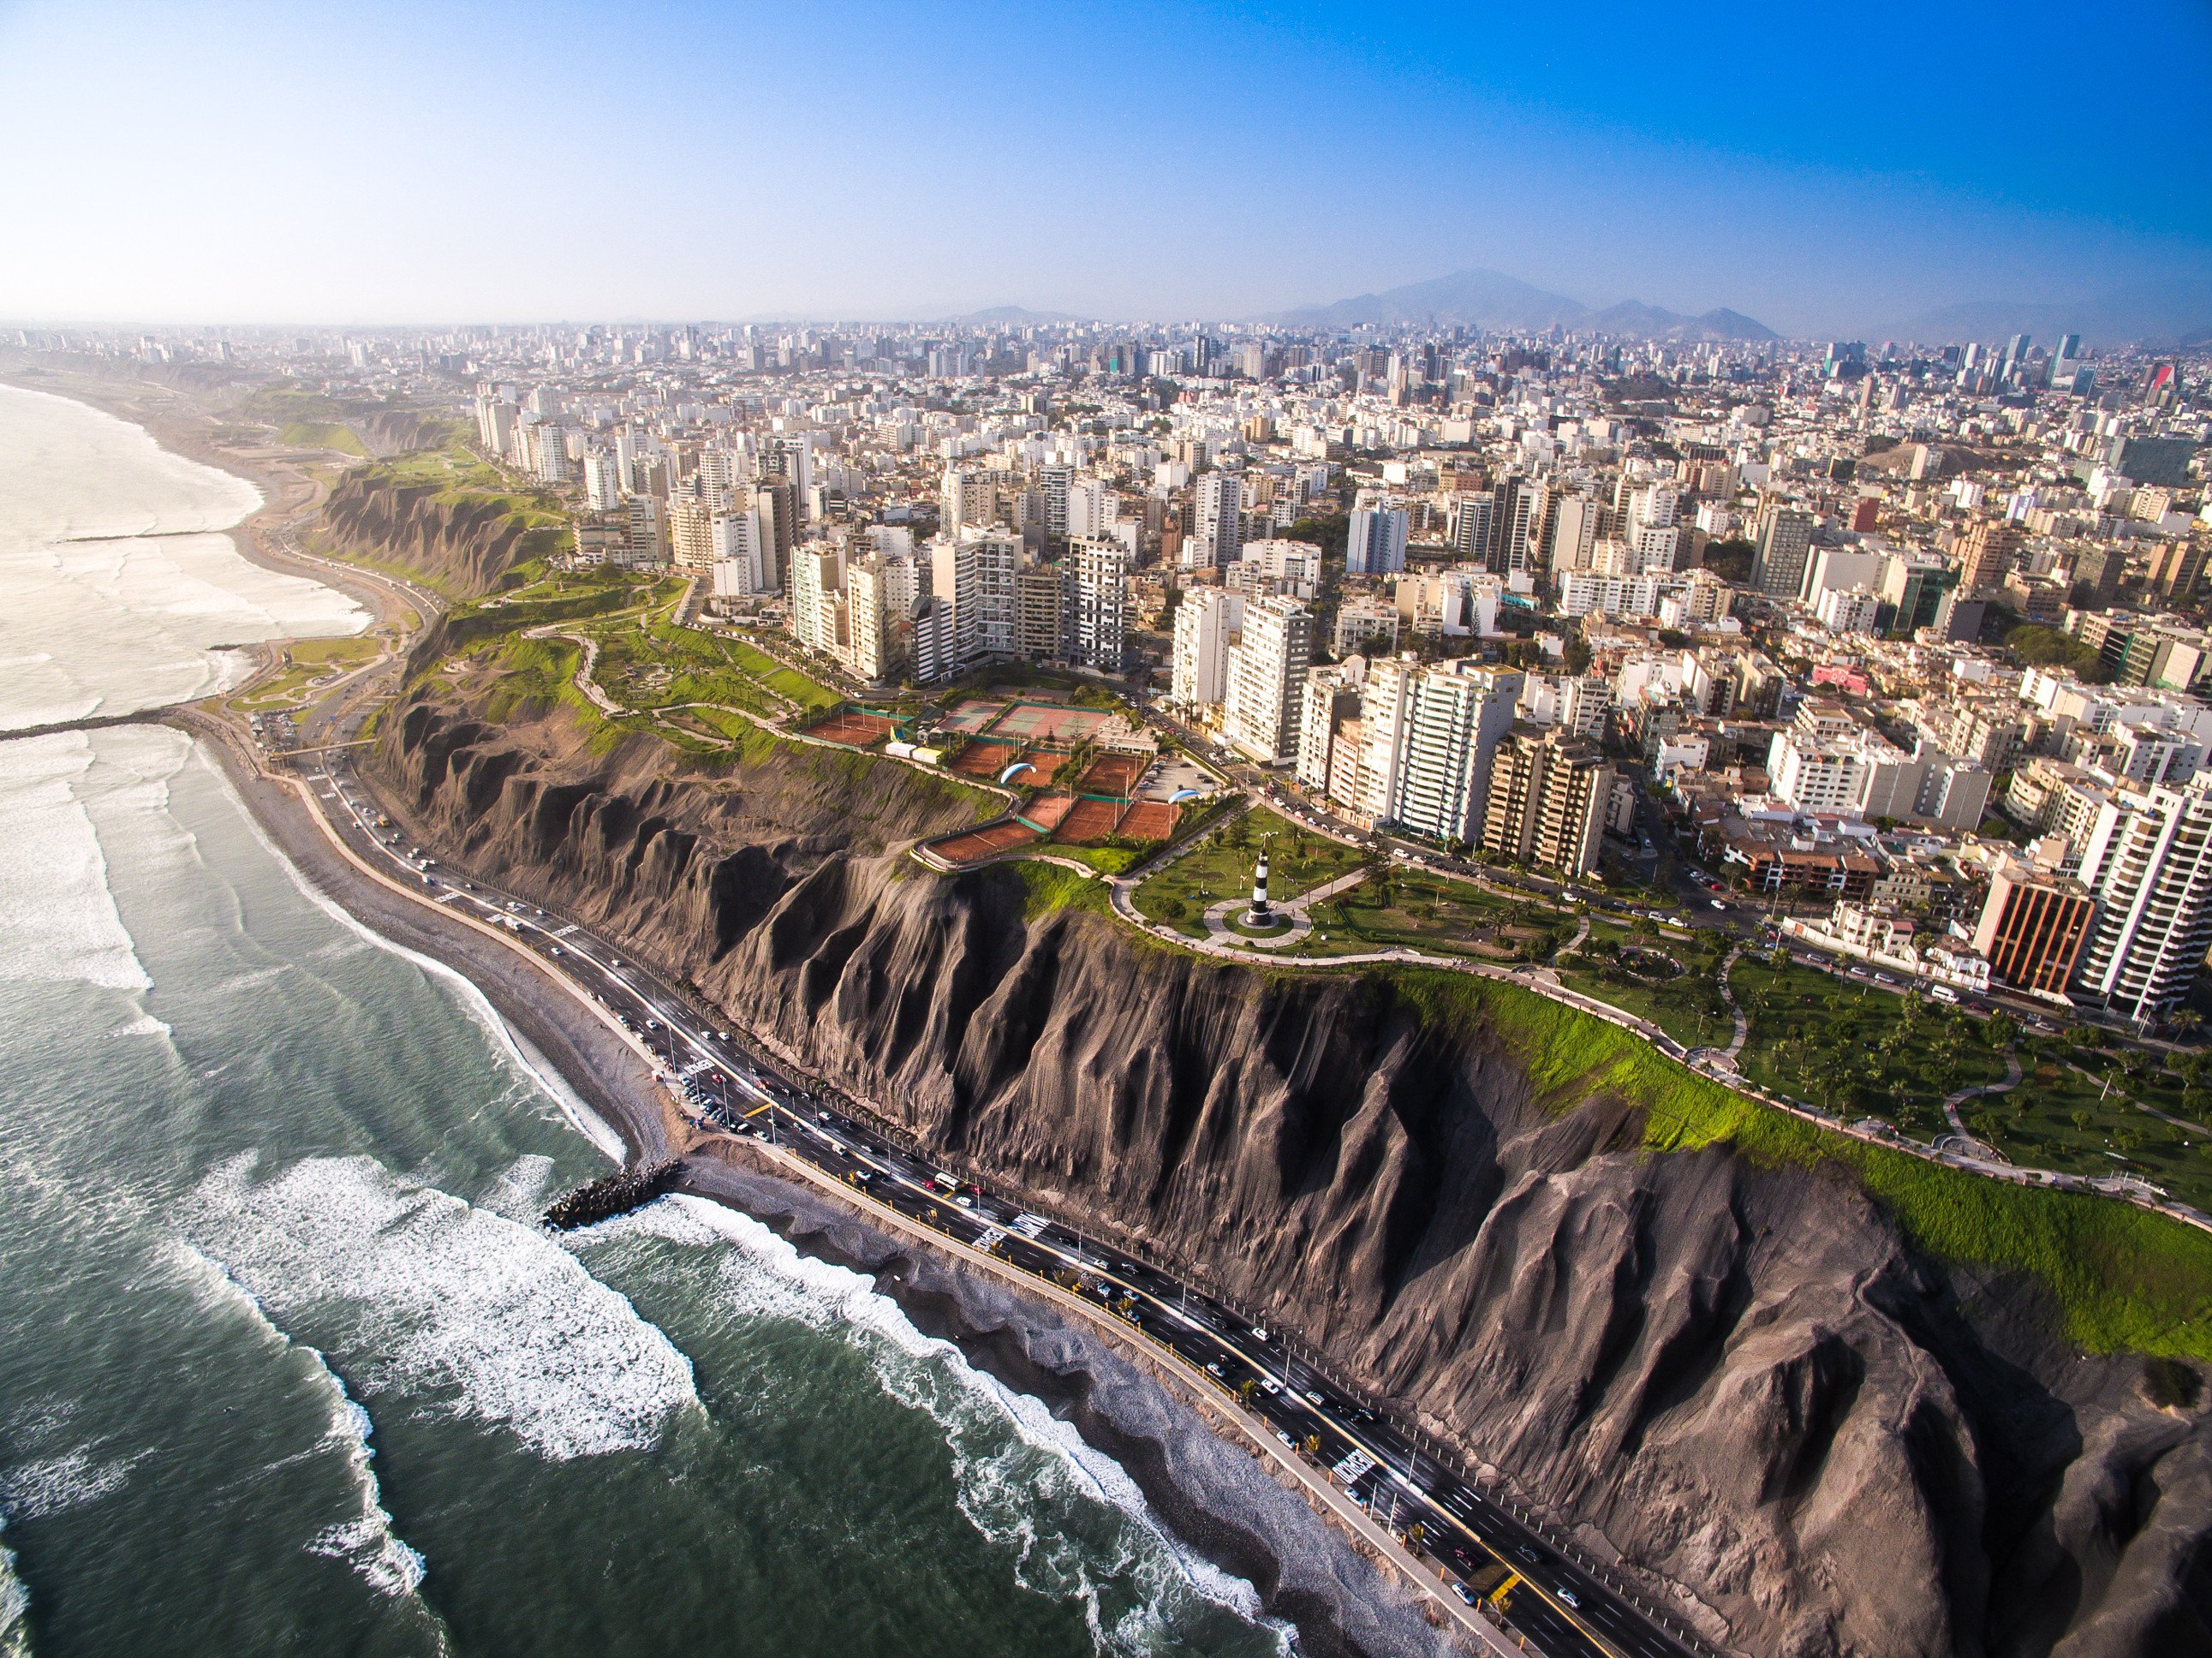 The Peruvian capital of Lima. Peru was Hong Kong’s fifth-largest trading partner in Latin America last year. Photo: Shutterstock